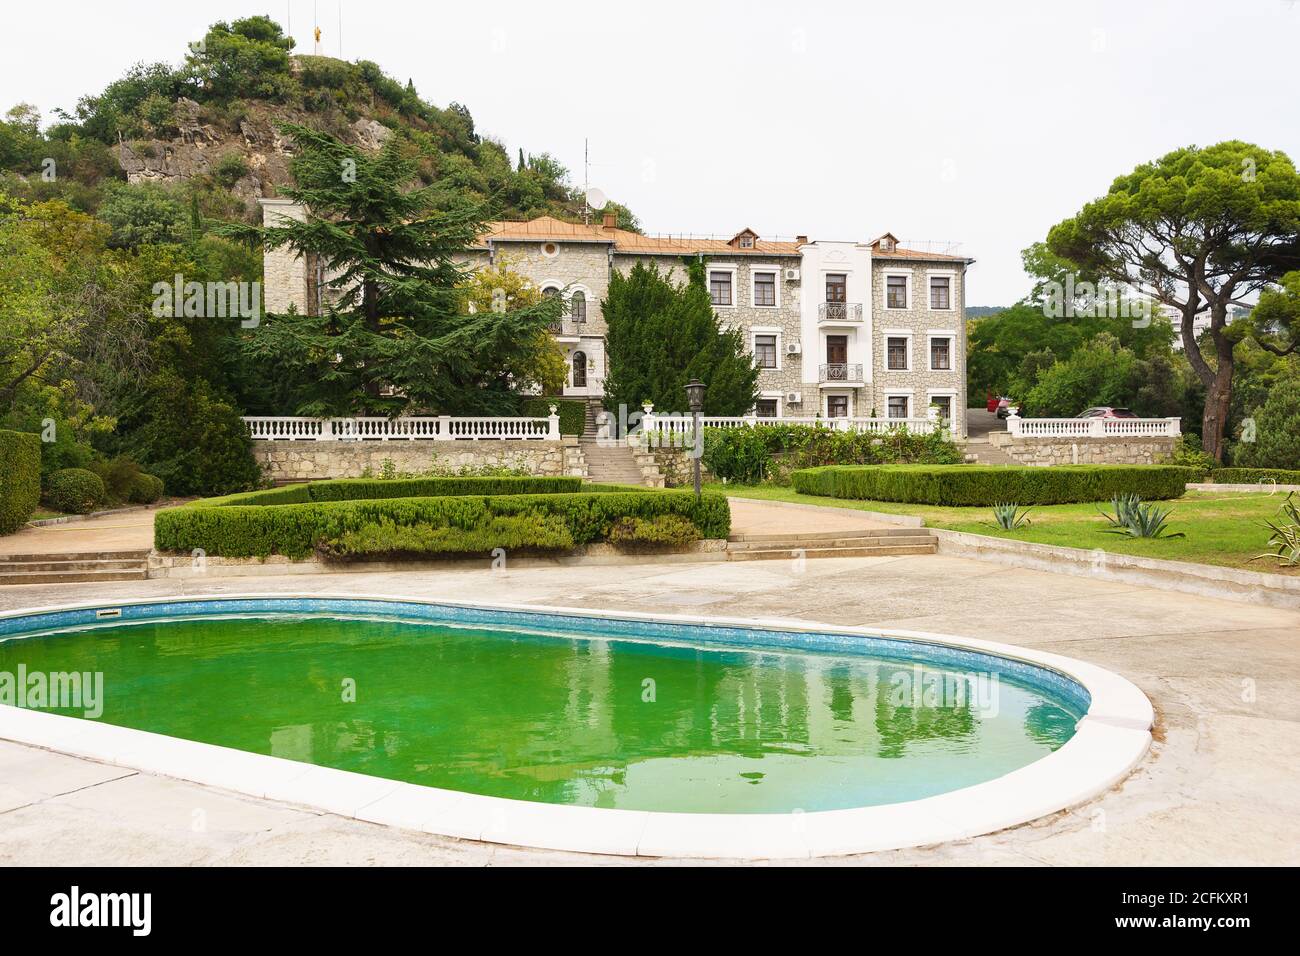 Koreiz, Yalta, Crimea, Russia - September 13, 2018: Golitsyn Palace building, trimmed shrubs and decorative pool on the territory of the estate of the Stock Photo